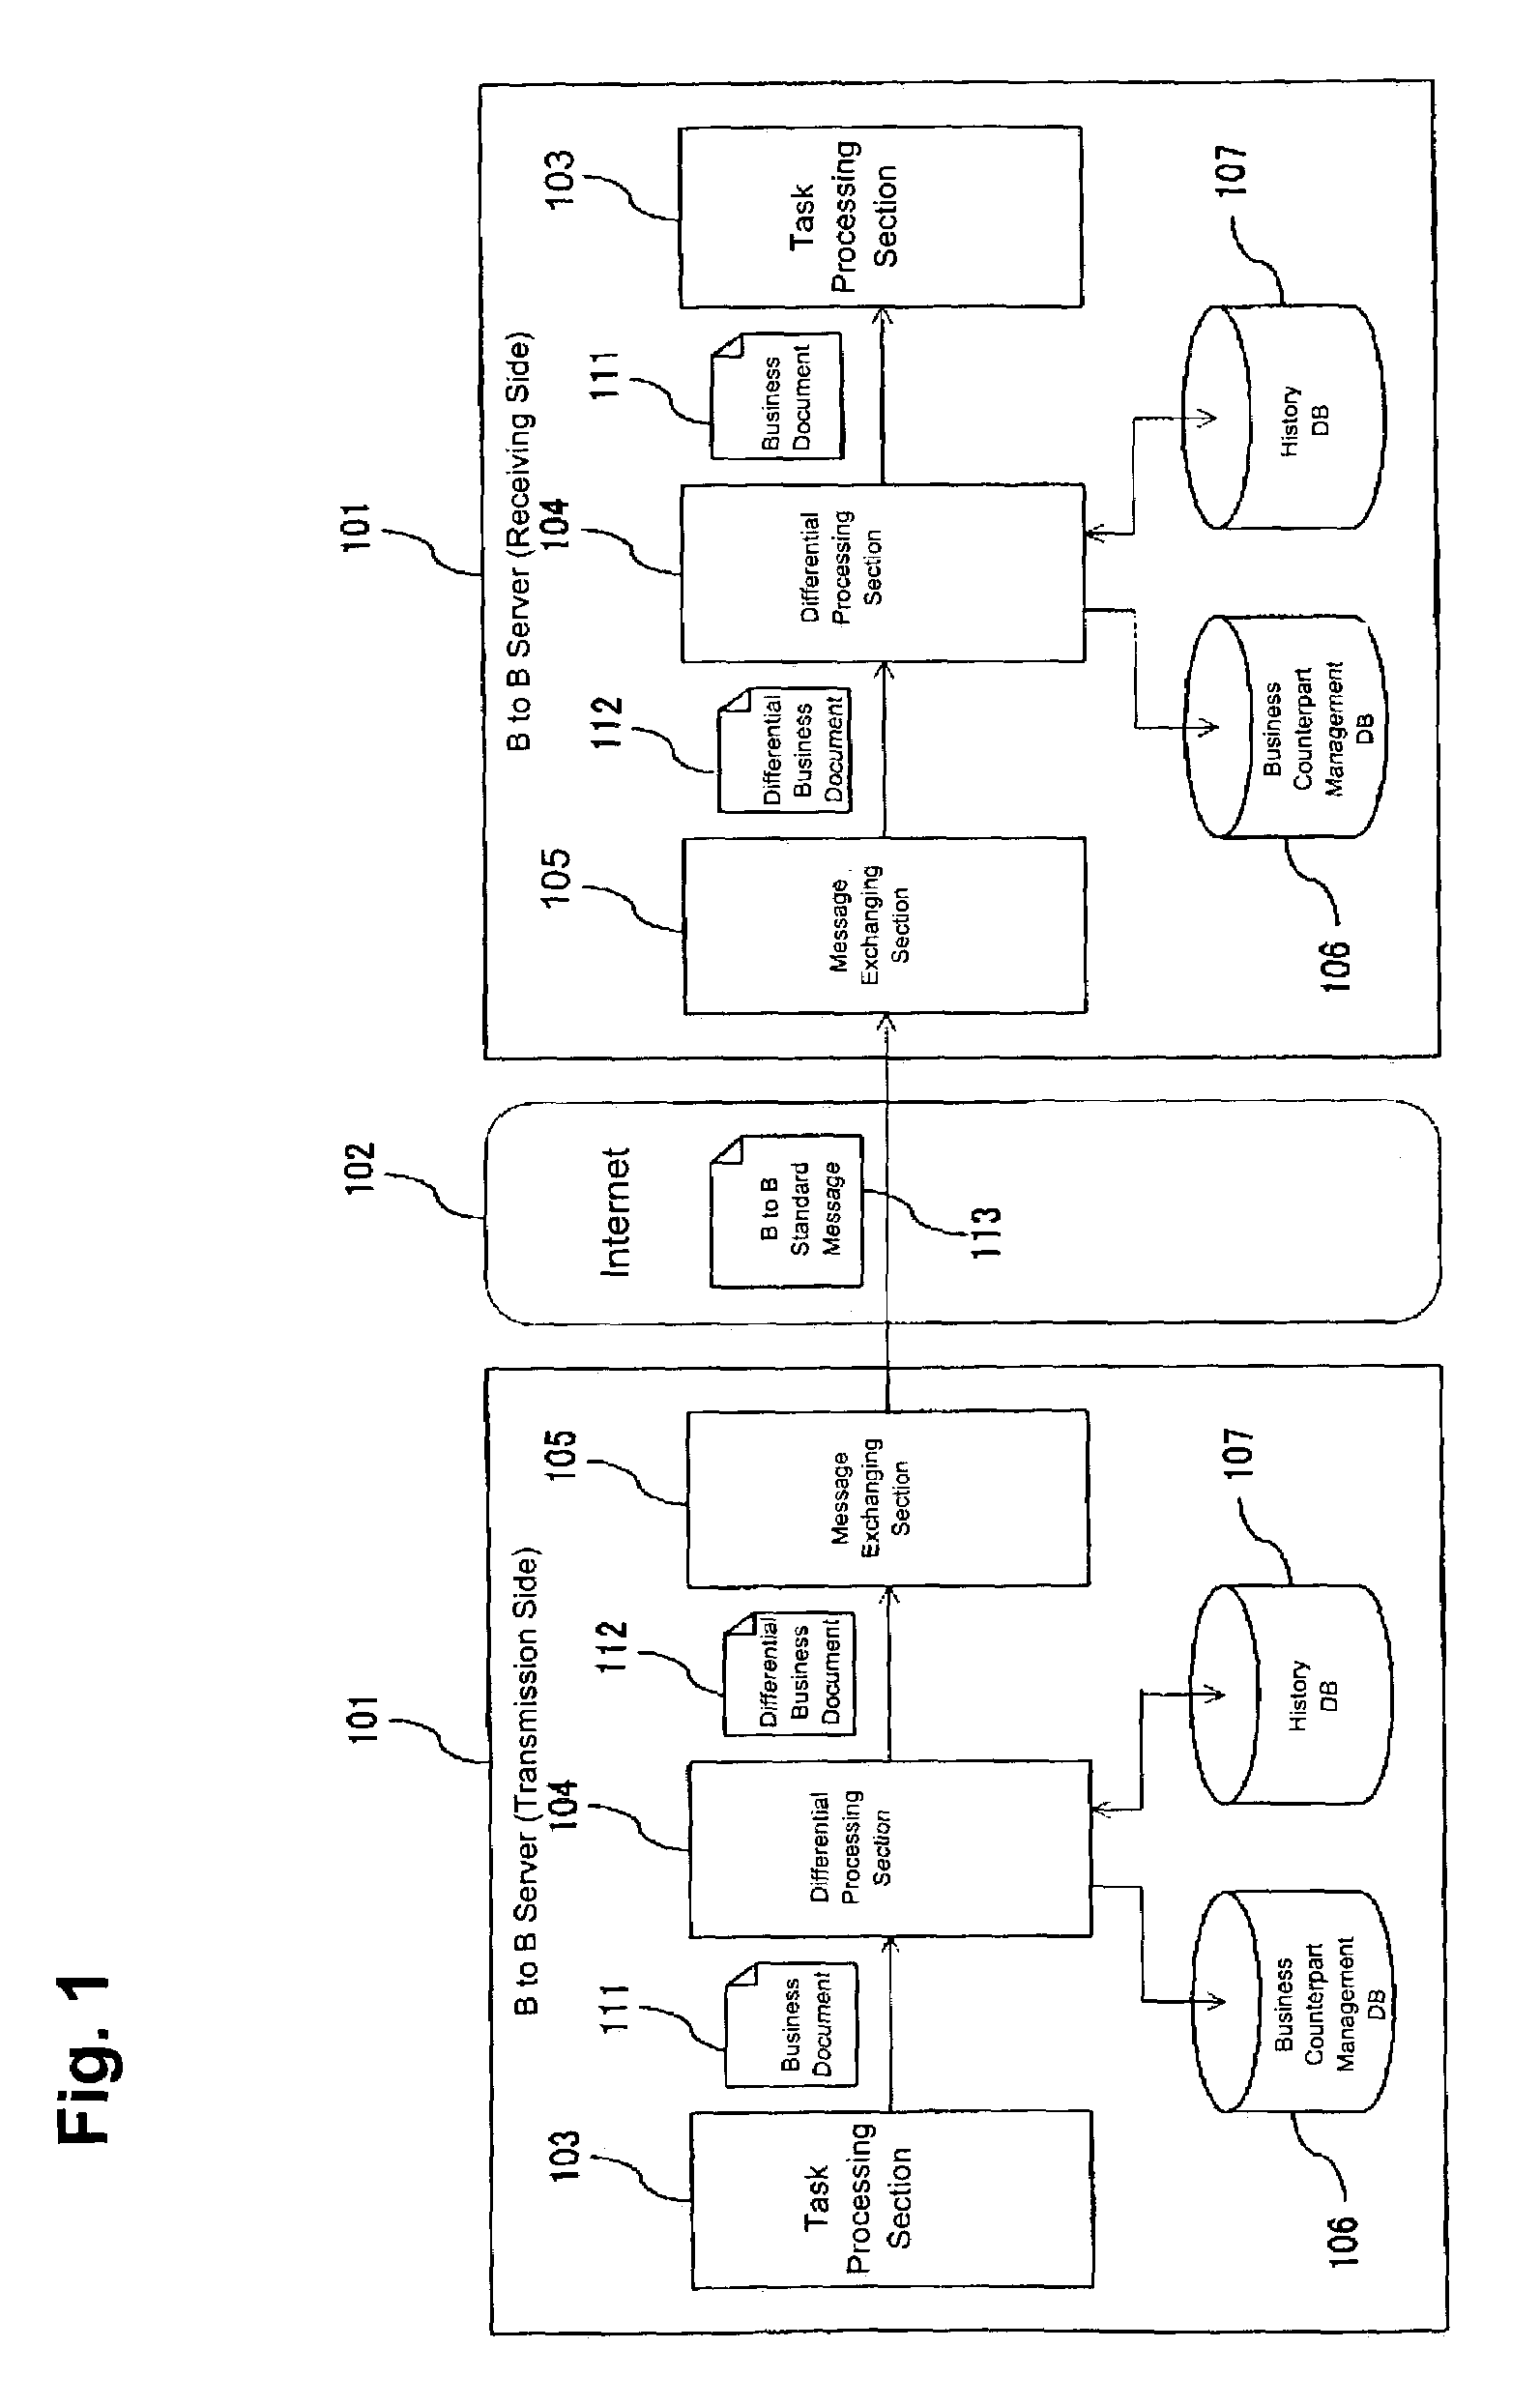 Method for reducing communication data amount in business to business electronic commerce